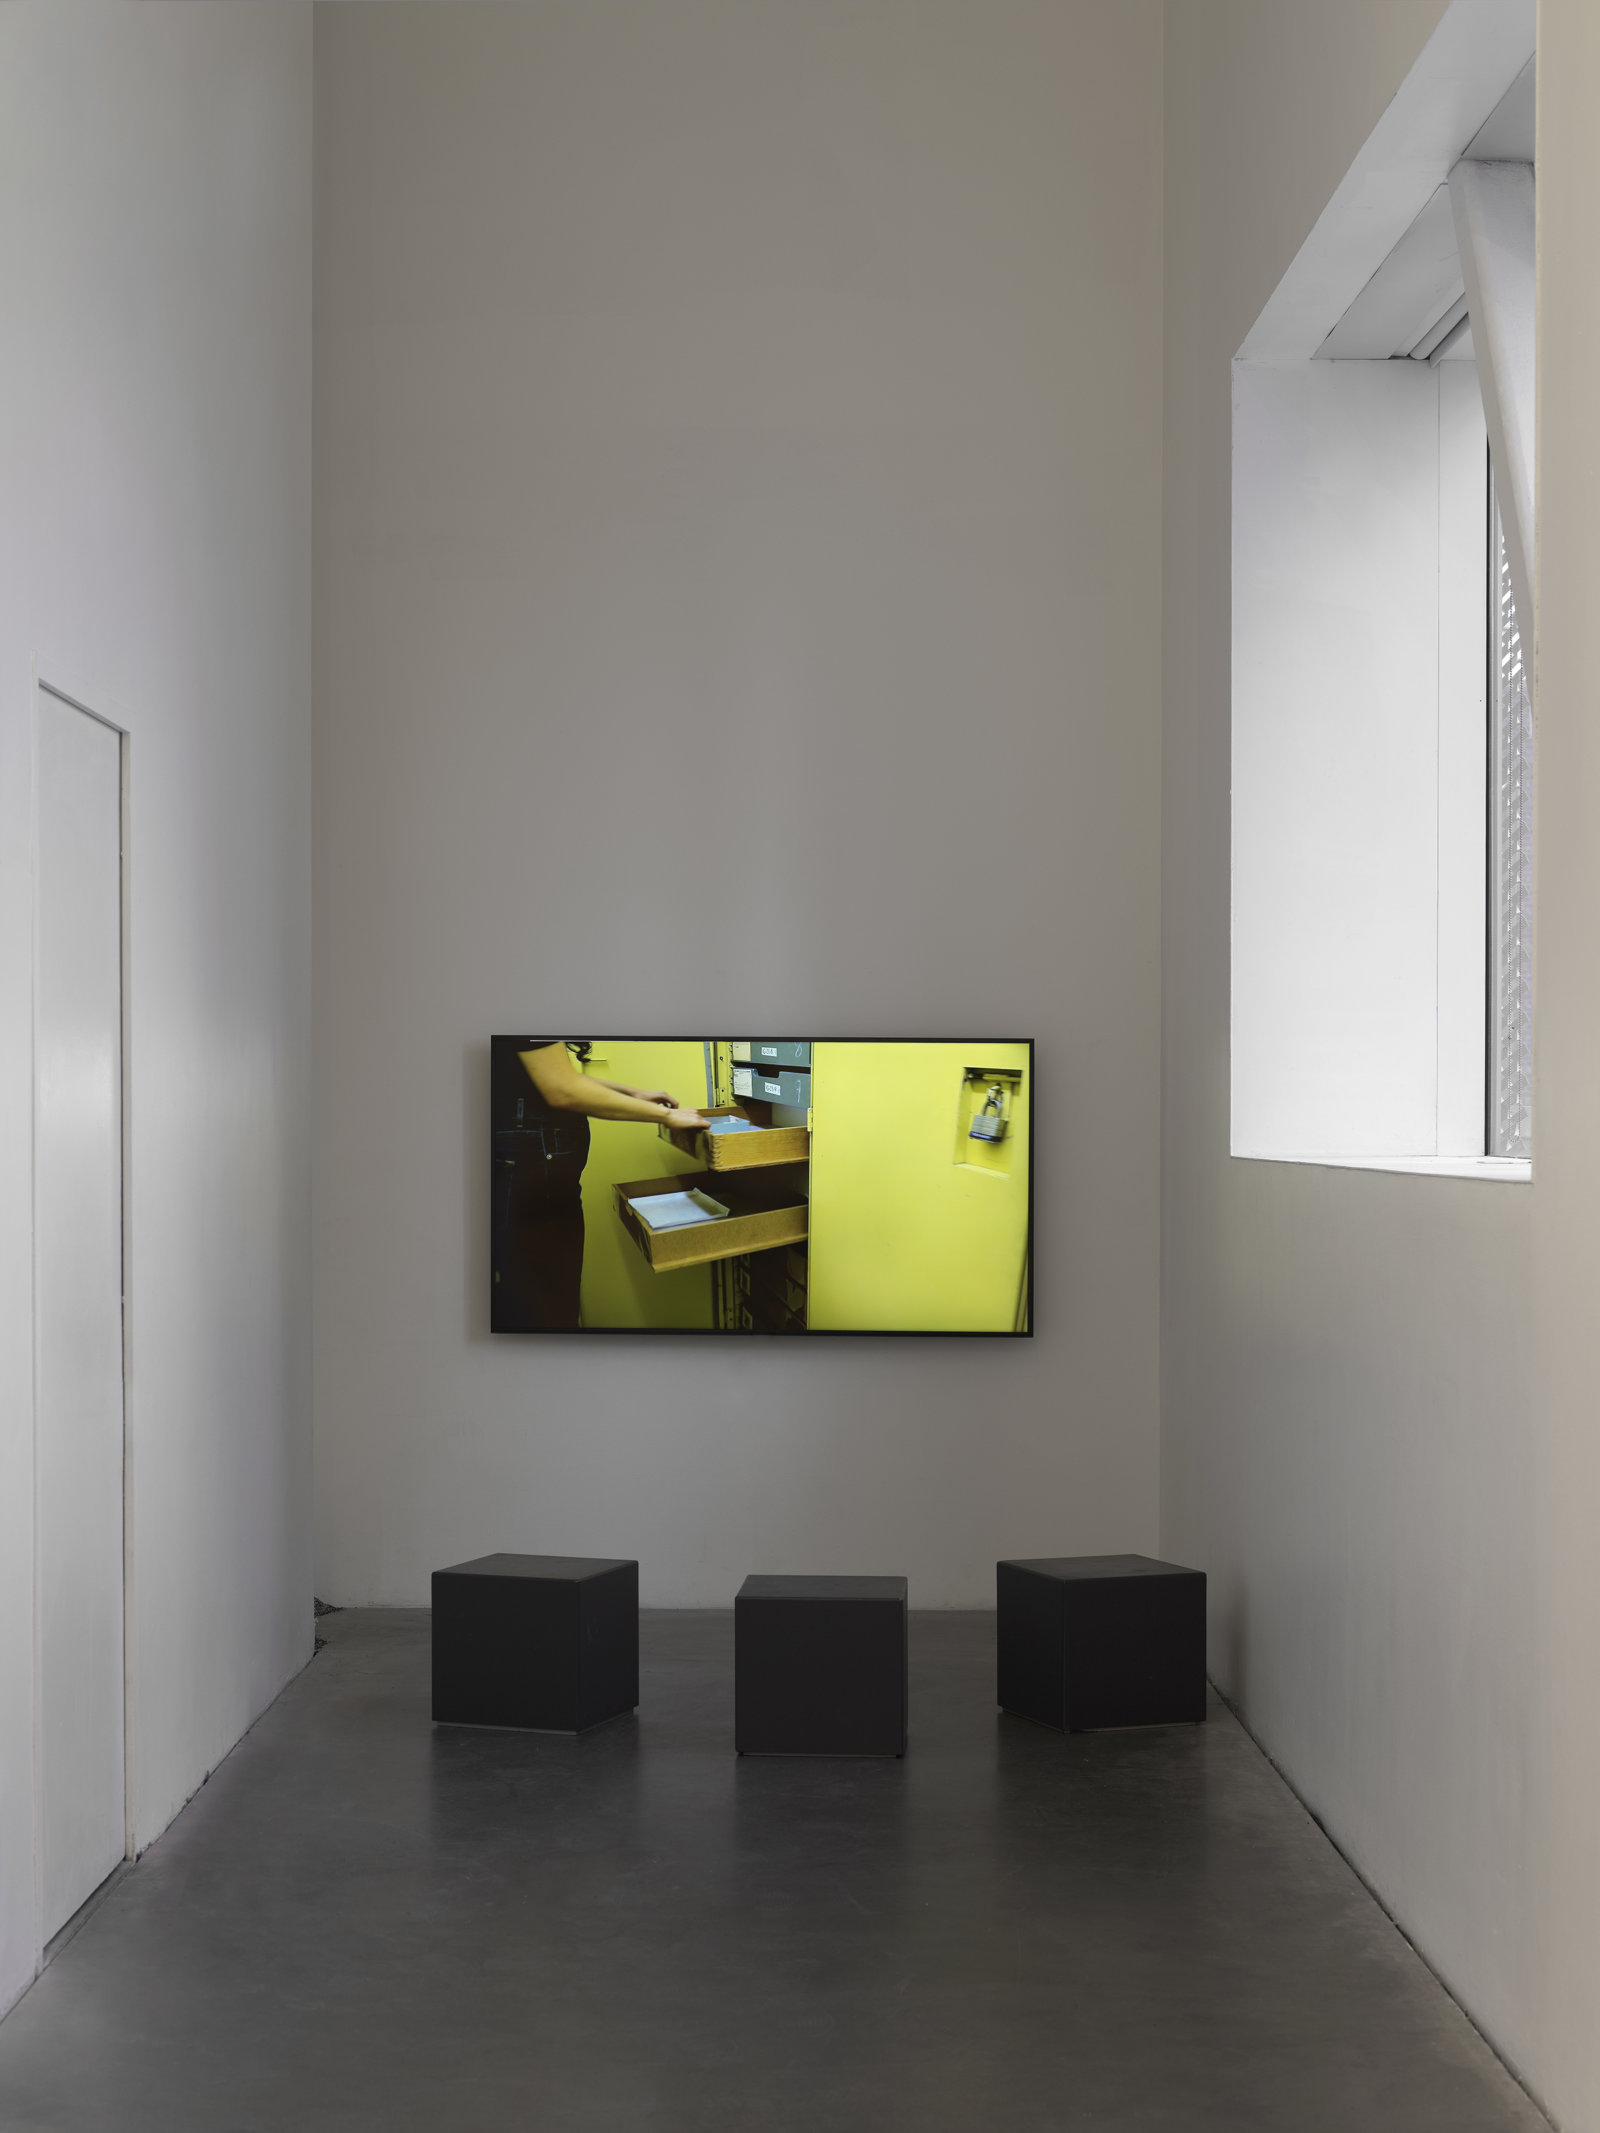 Tanya Lukin Linklater, An amplification through many minds, 2019, video, 36 minutes, 32 seconds. Installation view, New Museum Triennial: Soft Water Hard Stone, The New Museum, New York, USA, 2021